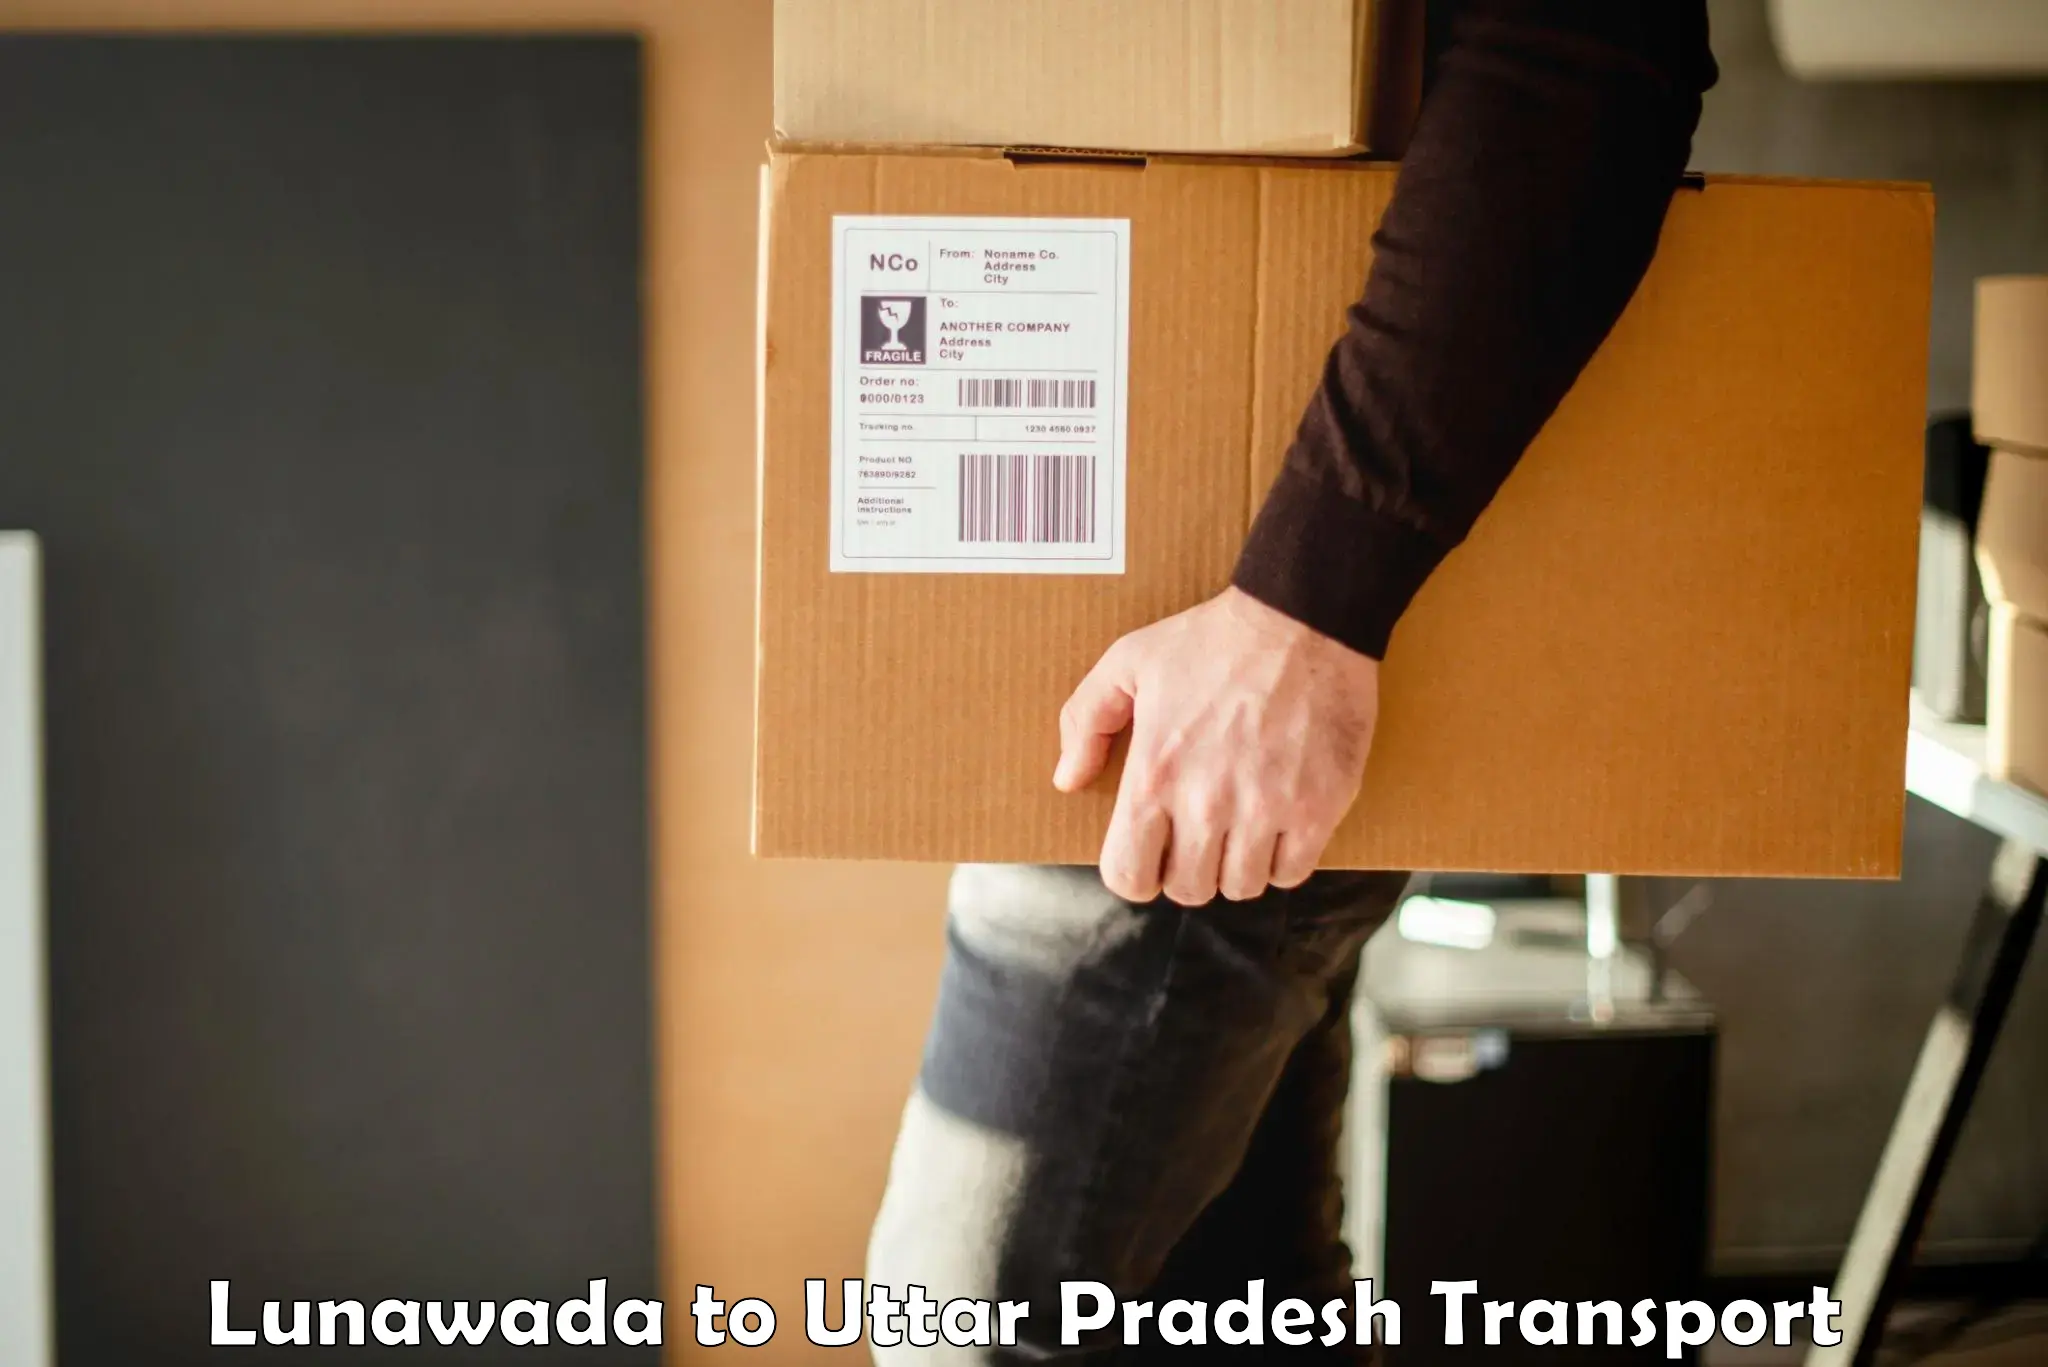 Truck transport companies in India Lunawada to Lalitpur